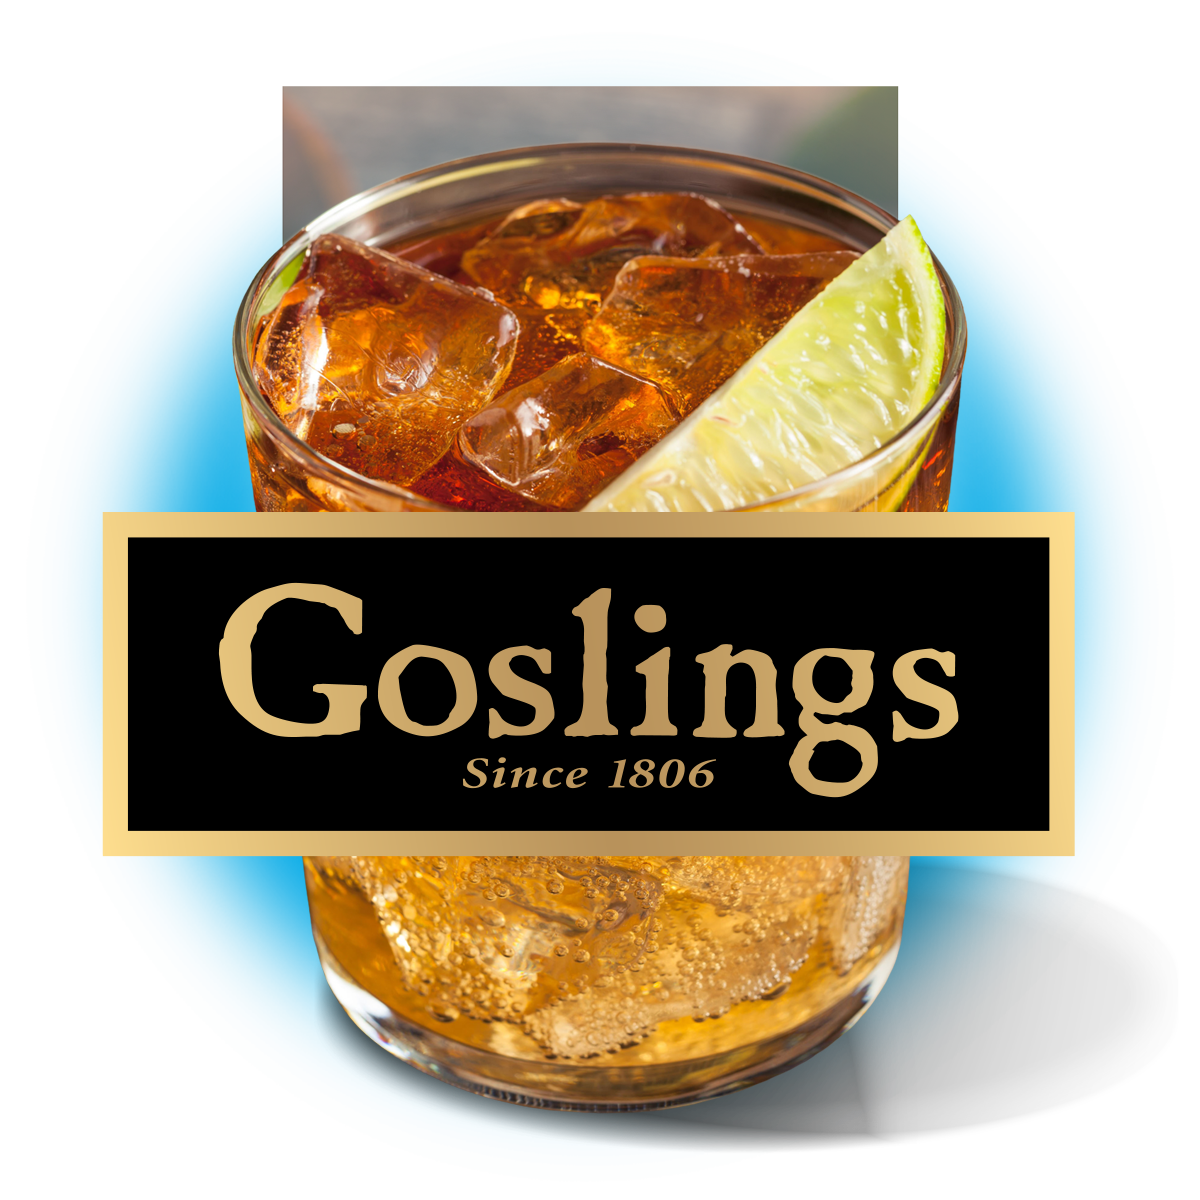 TRY GOSLING'S STORMY GINGER BEER TODAY!